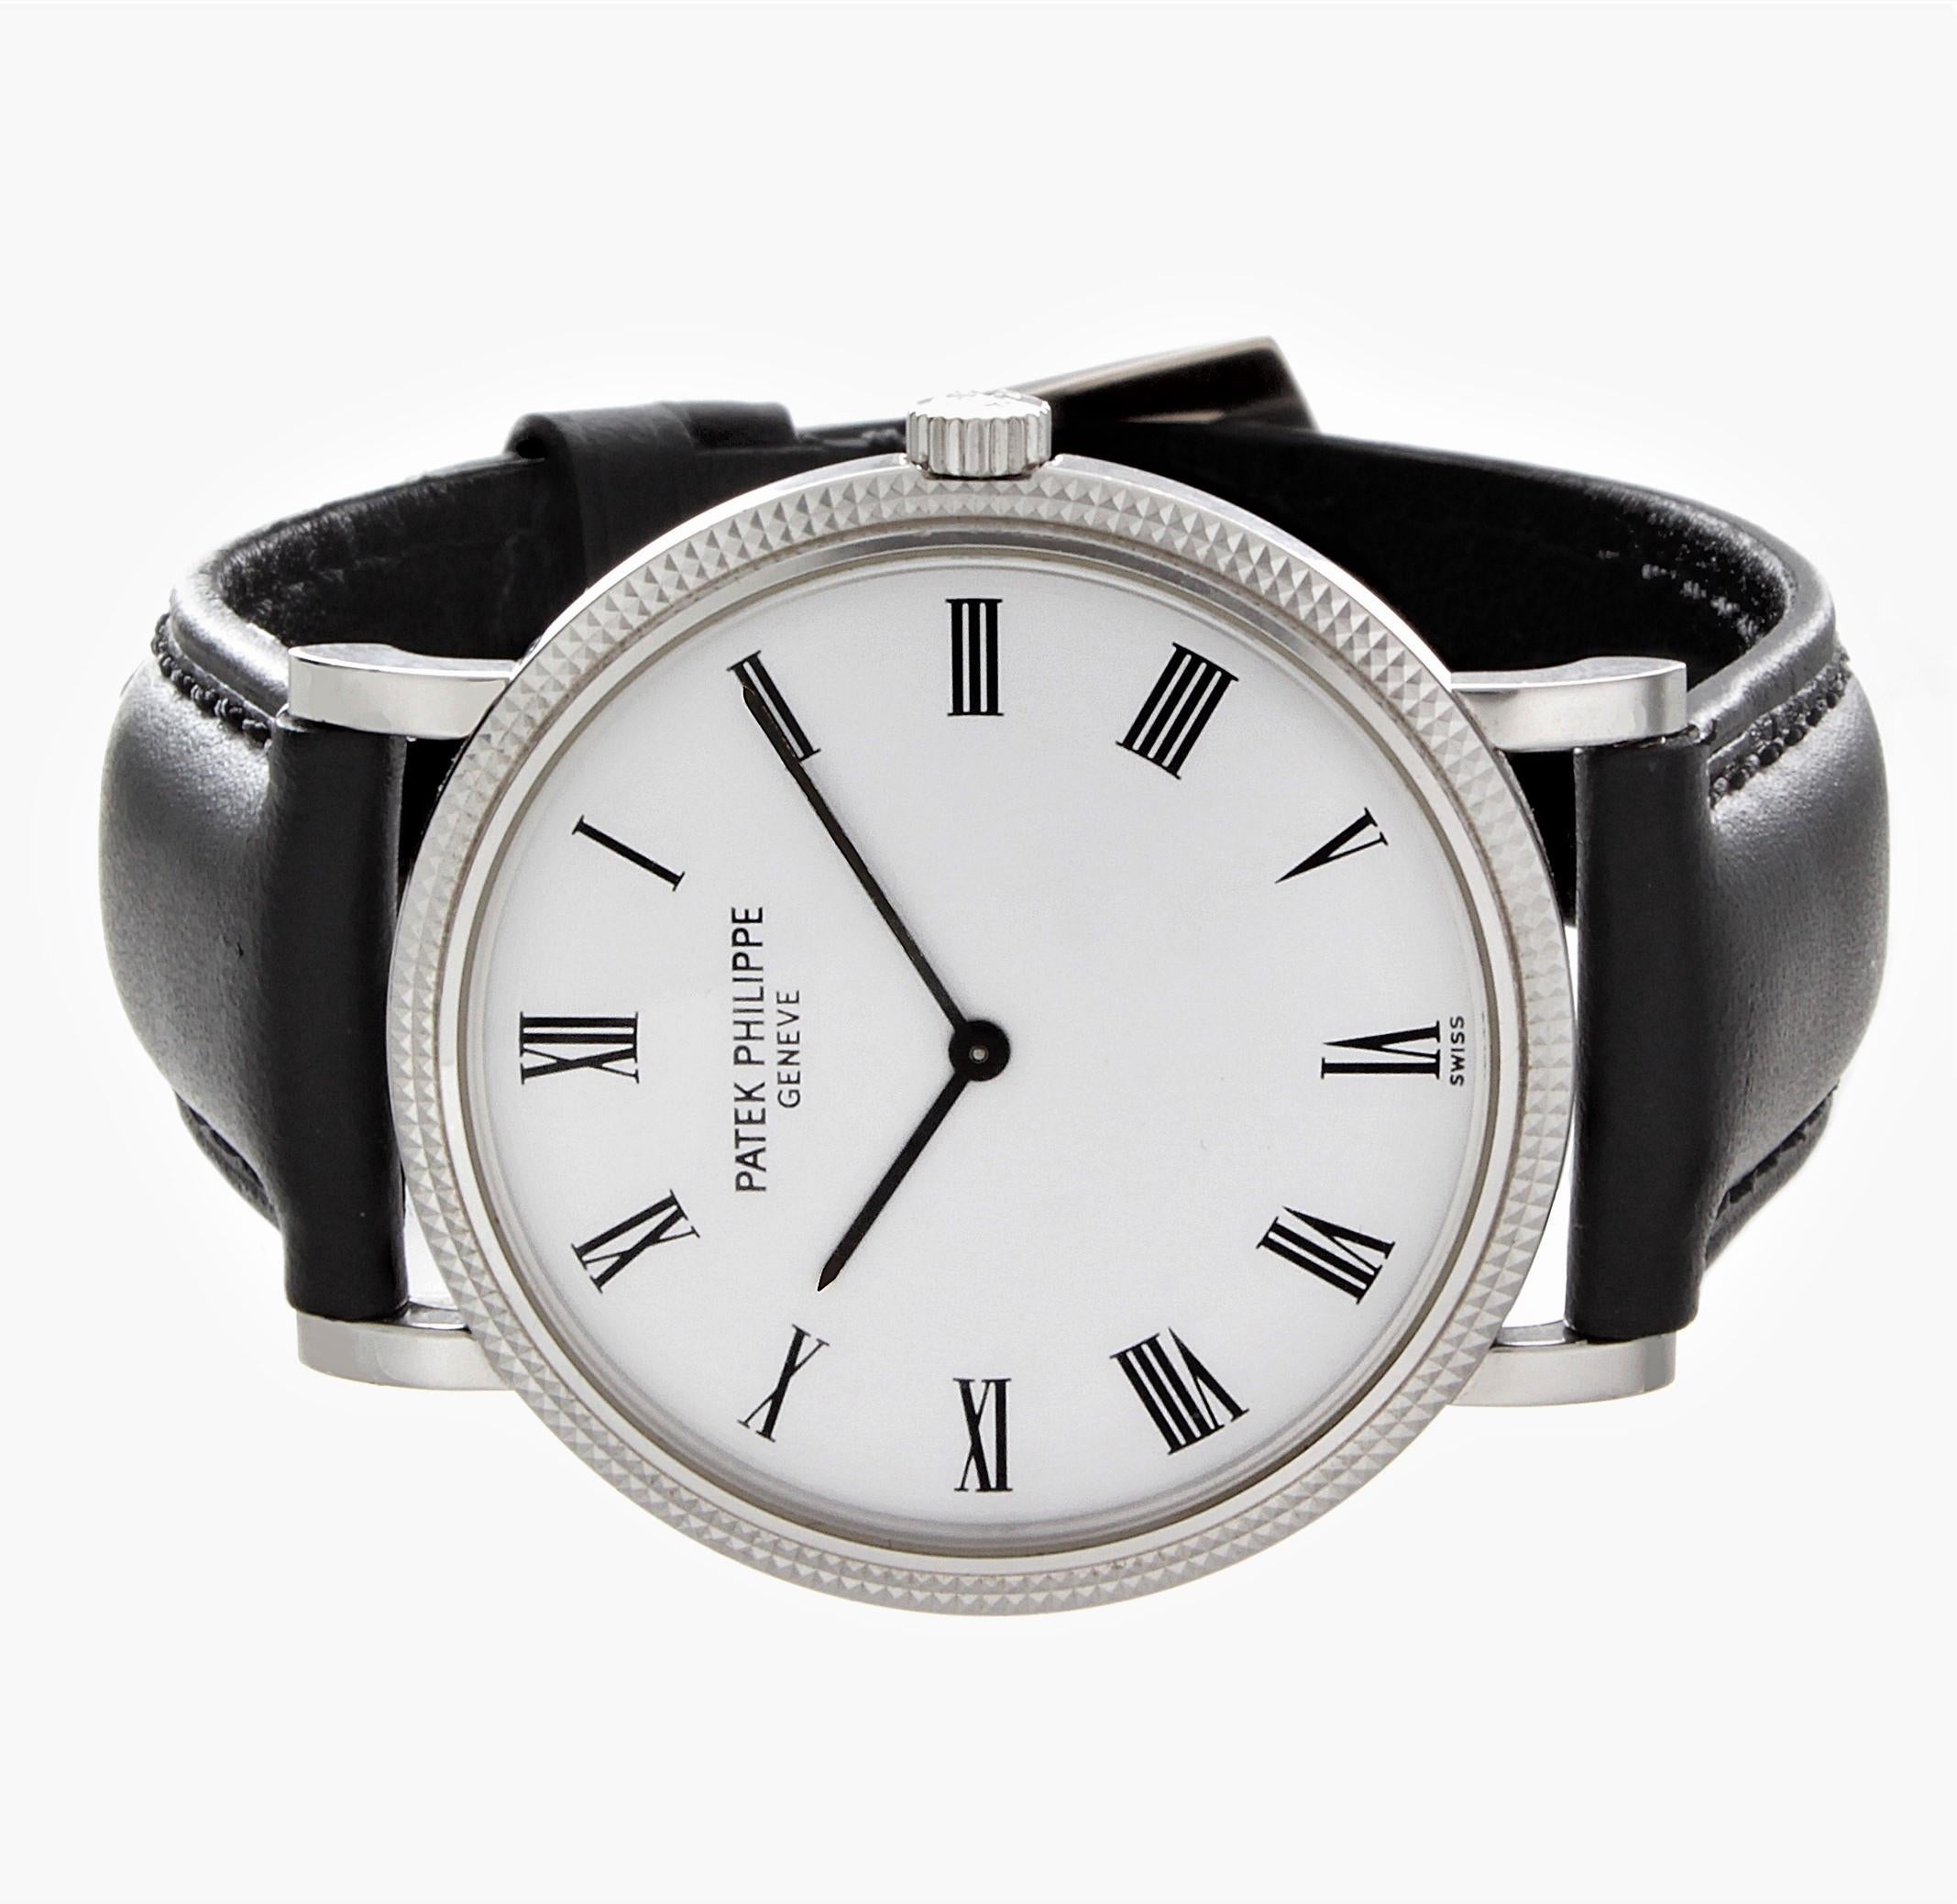 Patek Philippe 5120G Extra Thin Automatic Calatrava Watch White Gold In Excellent Condition For Sale In Santa Monica, CA